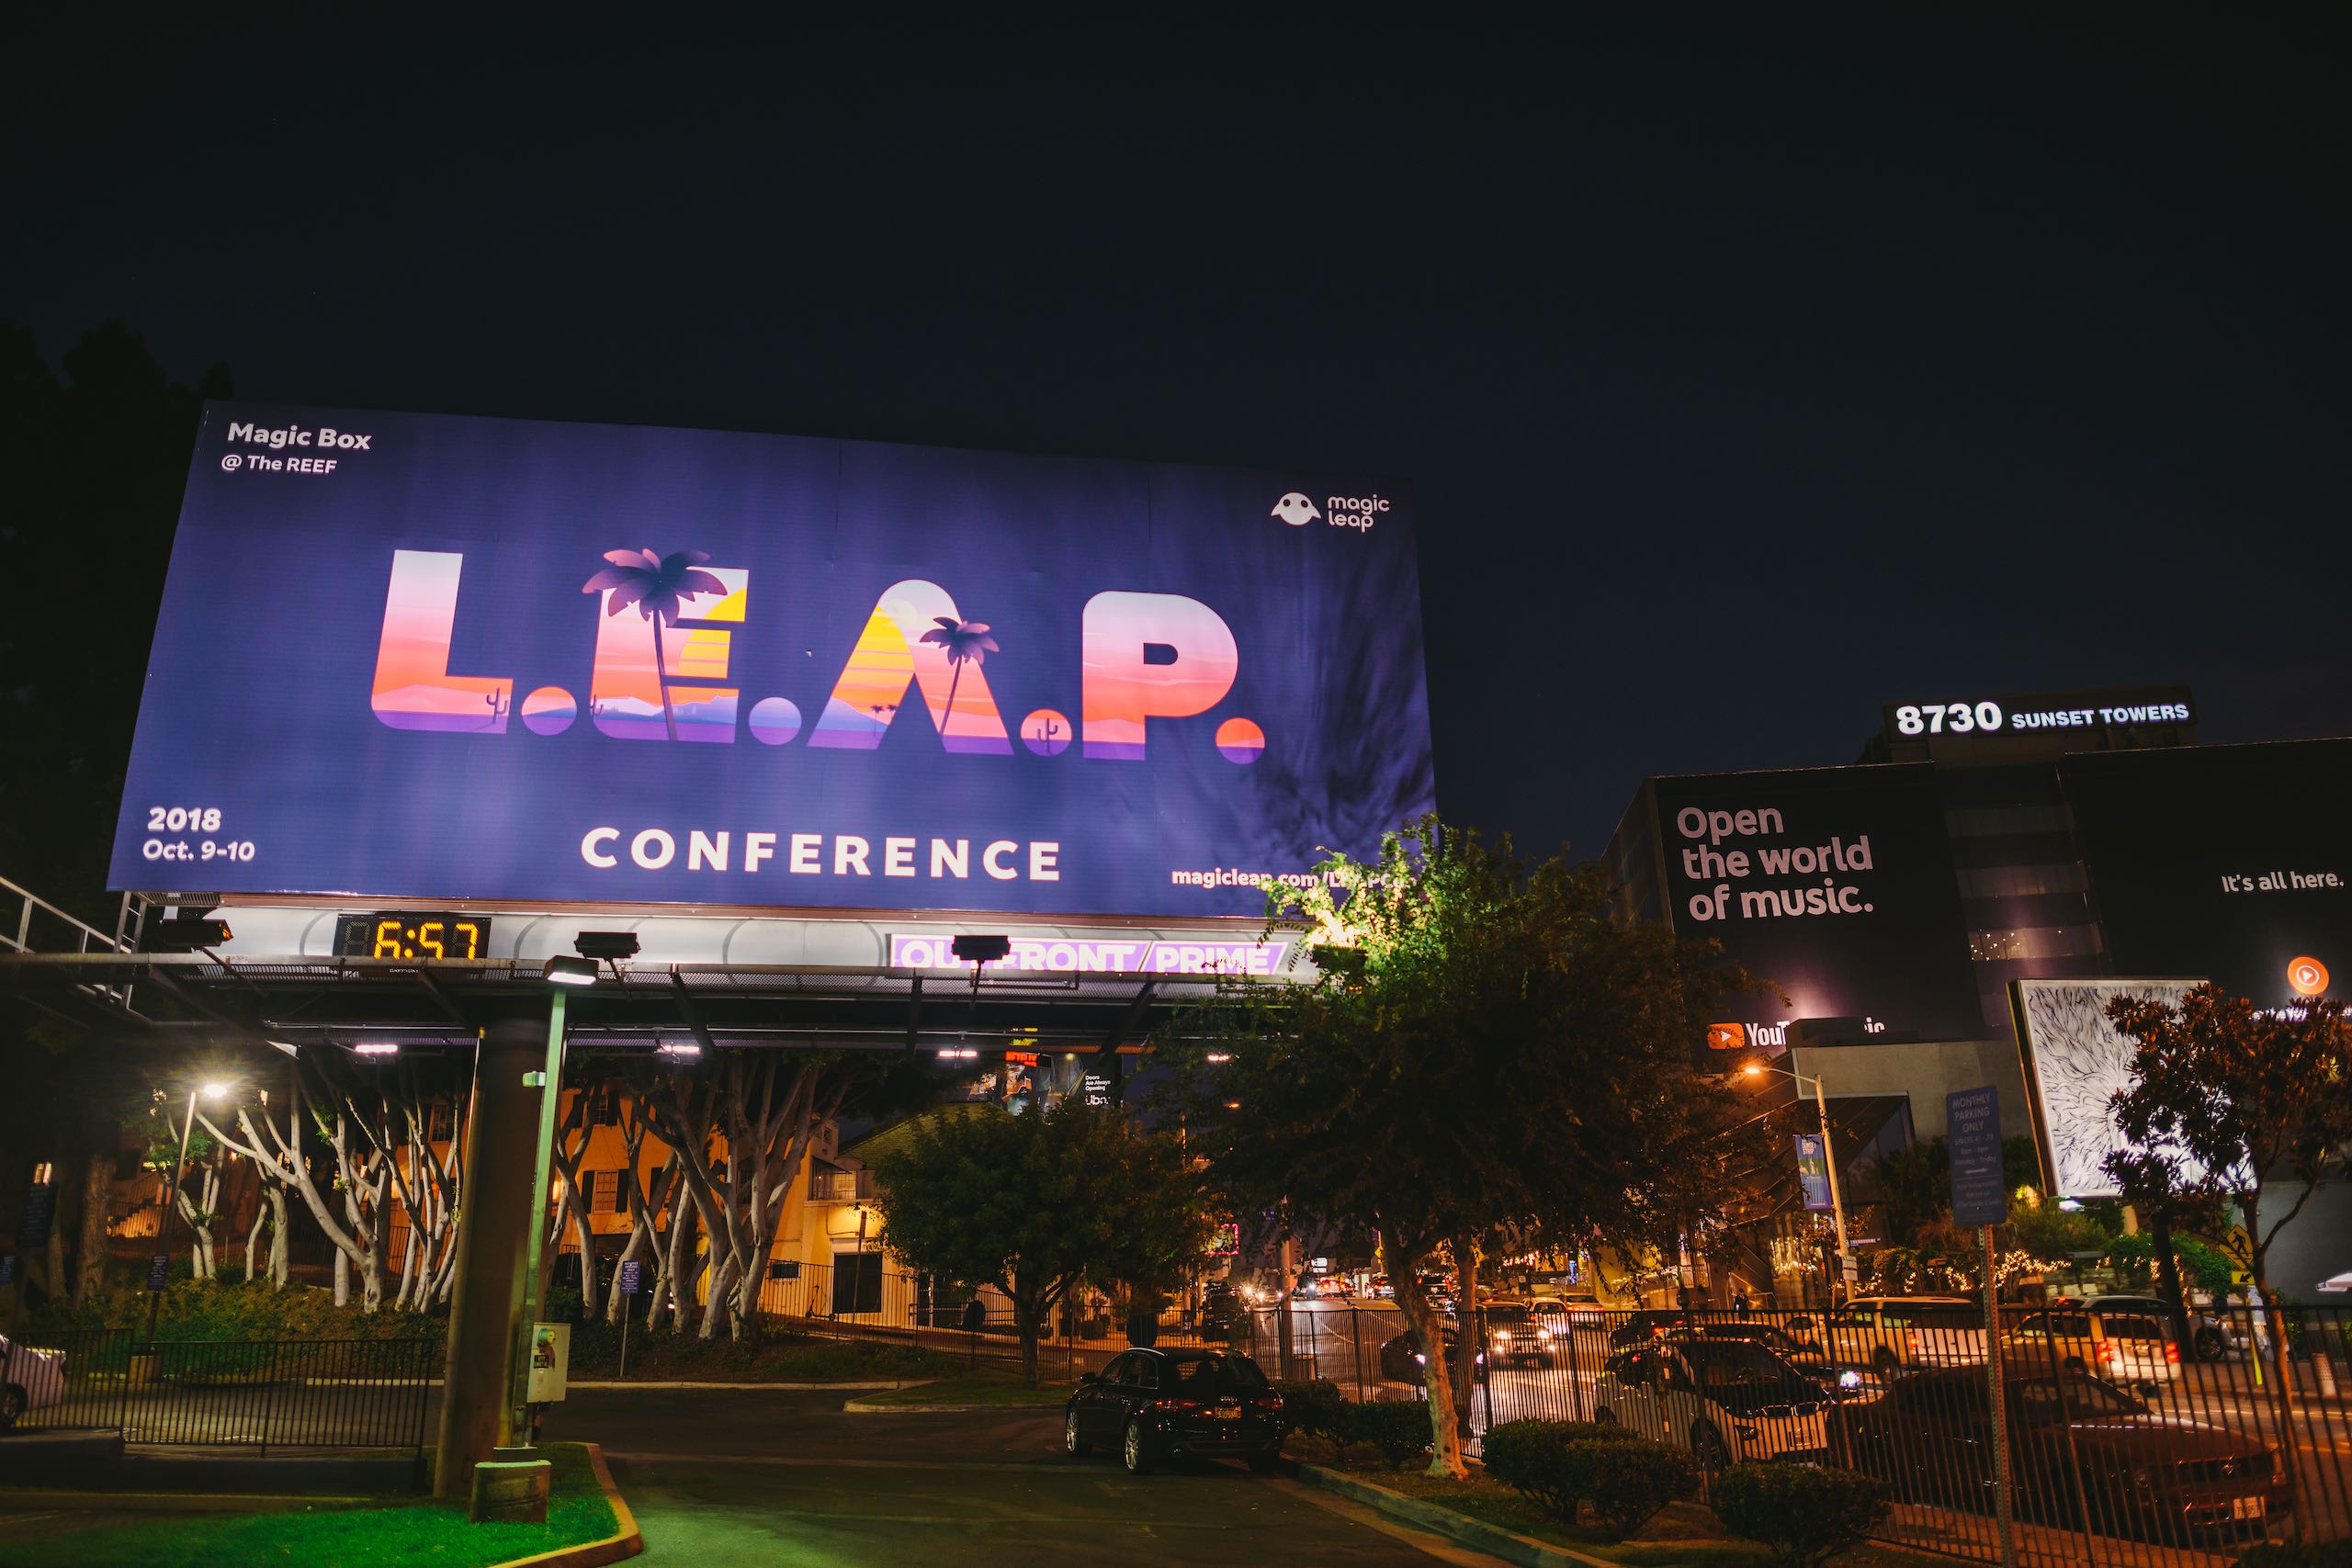 LEAP Conference billboard on display by a parking lot in city near road with cars parked and driving by at night